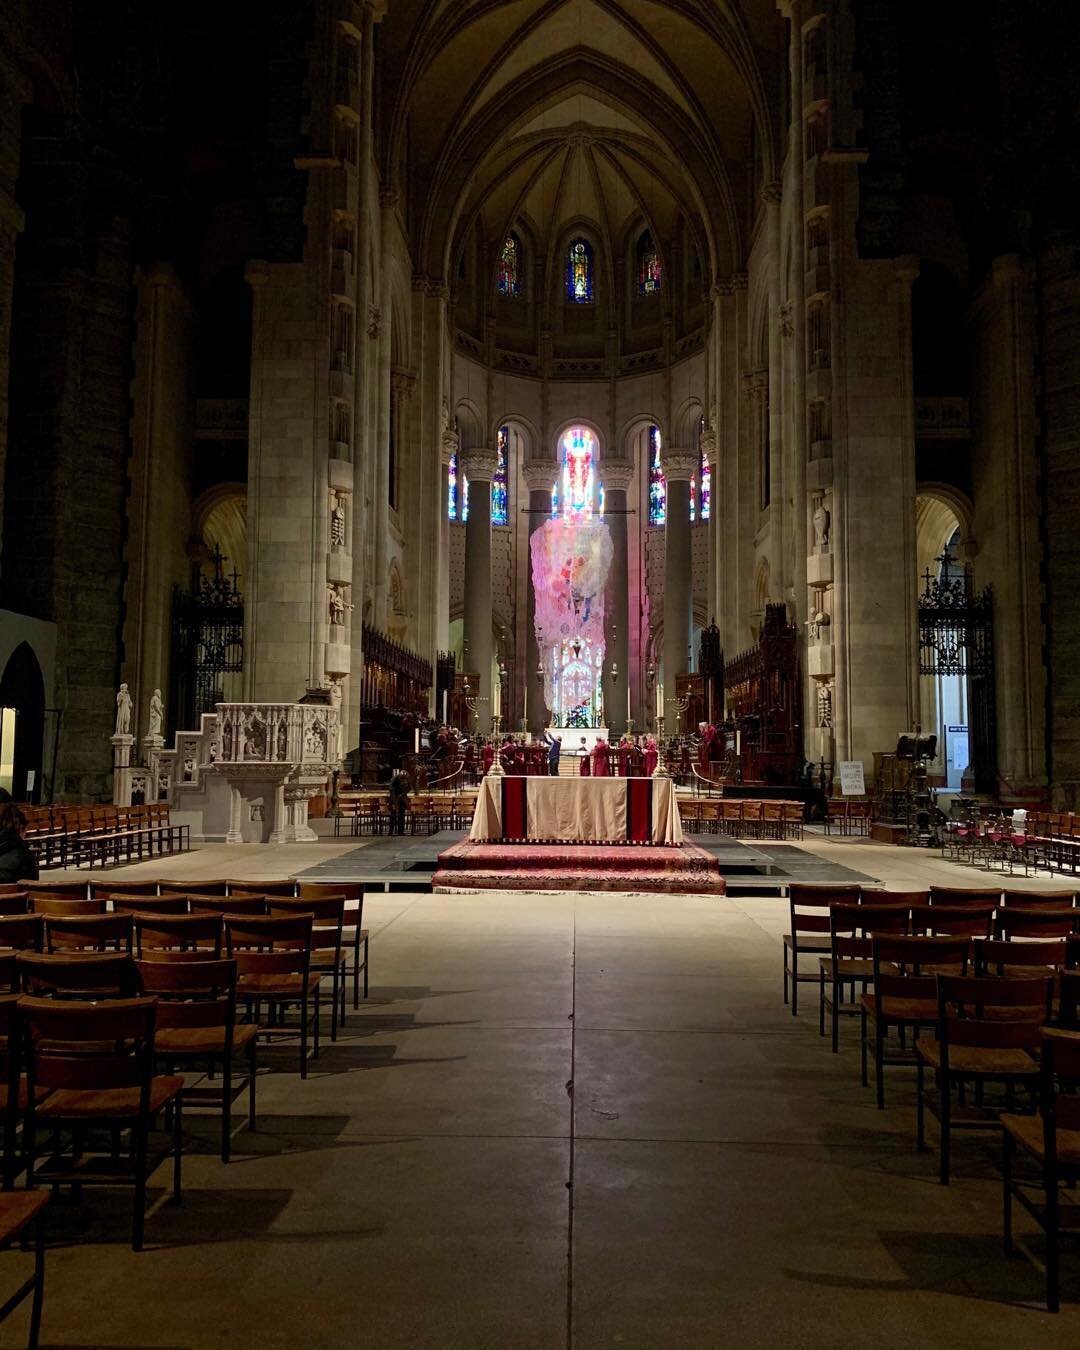 Great time preaching at Cathedral of St. John the Divine in New York City. Holy ground.